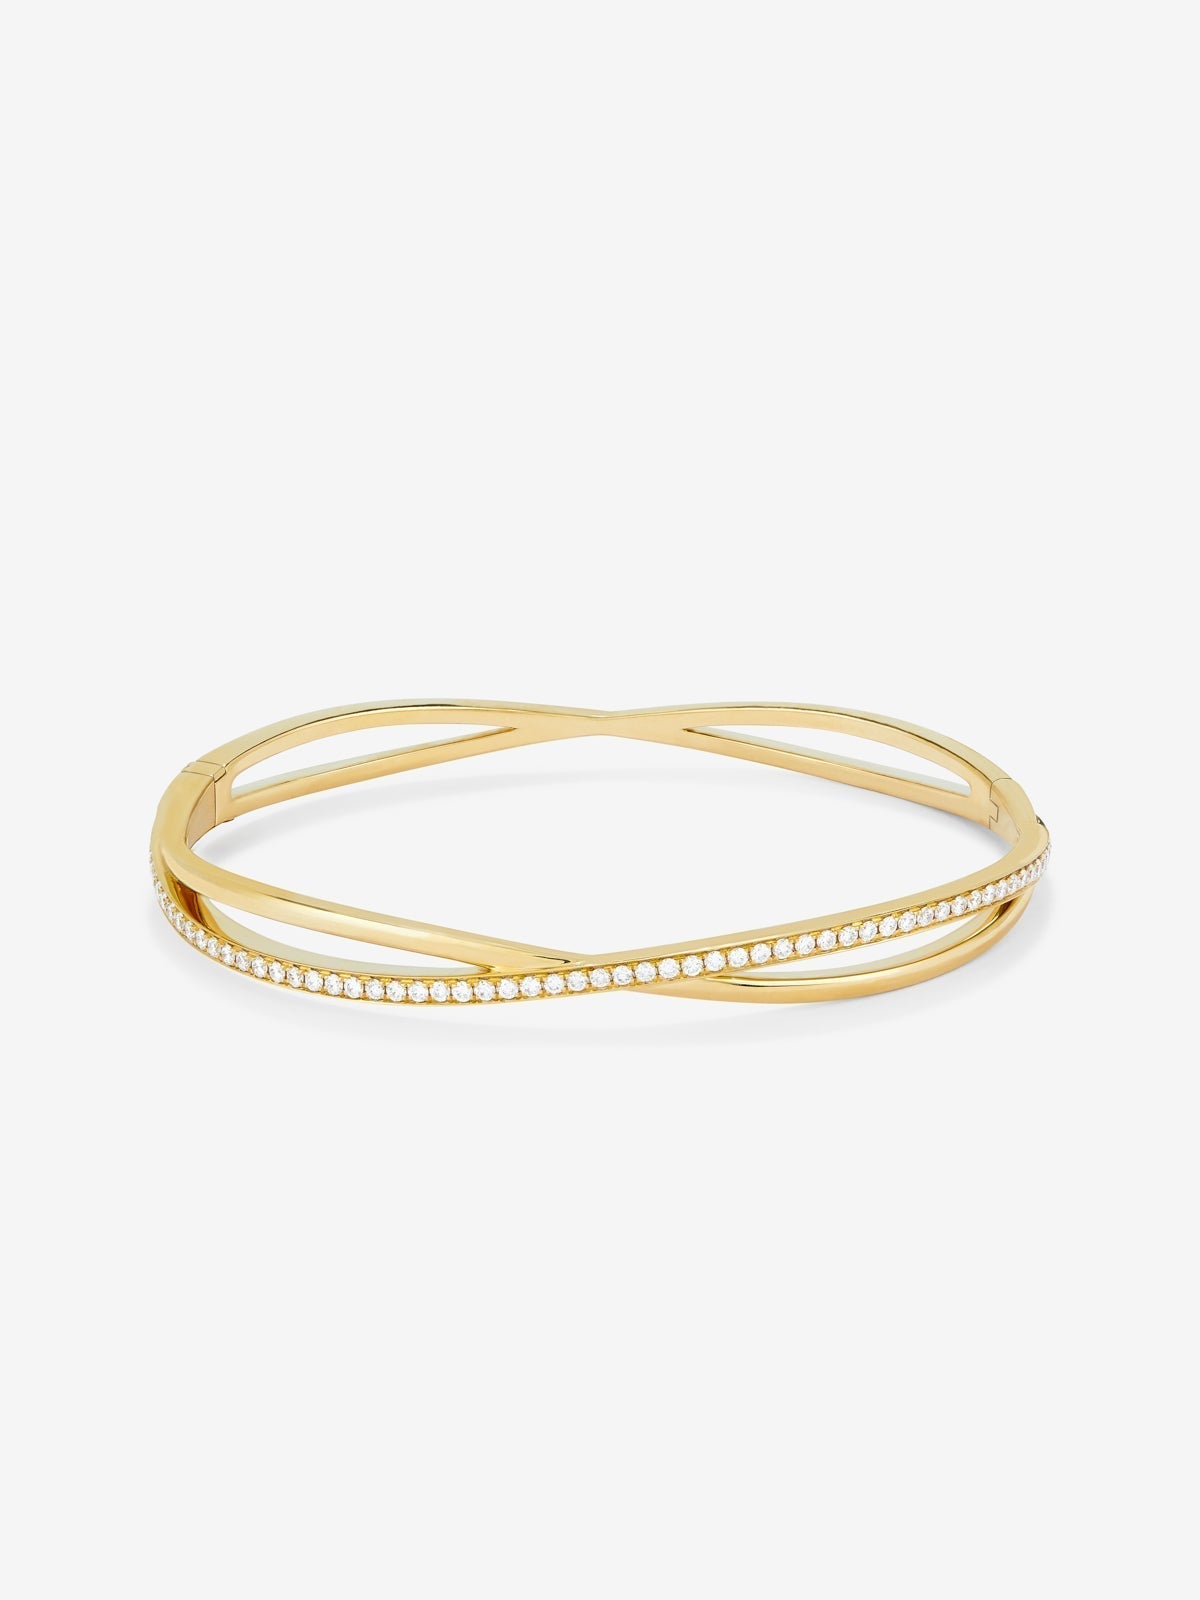 Rigid yellow gold bracelet of 18k with white diamonds in 0.74 cts